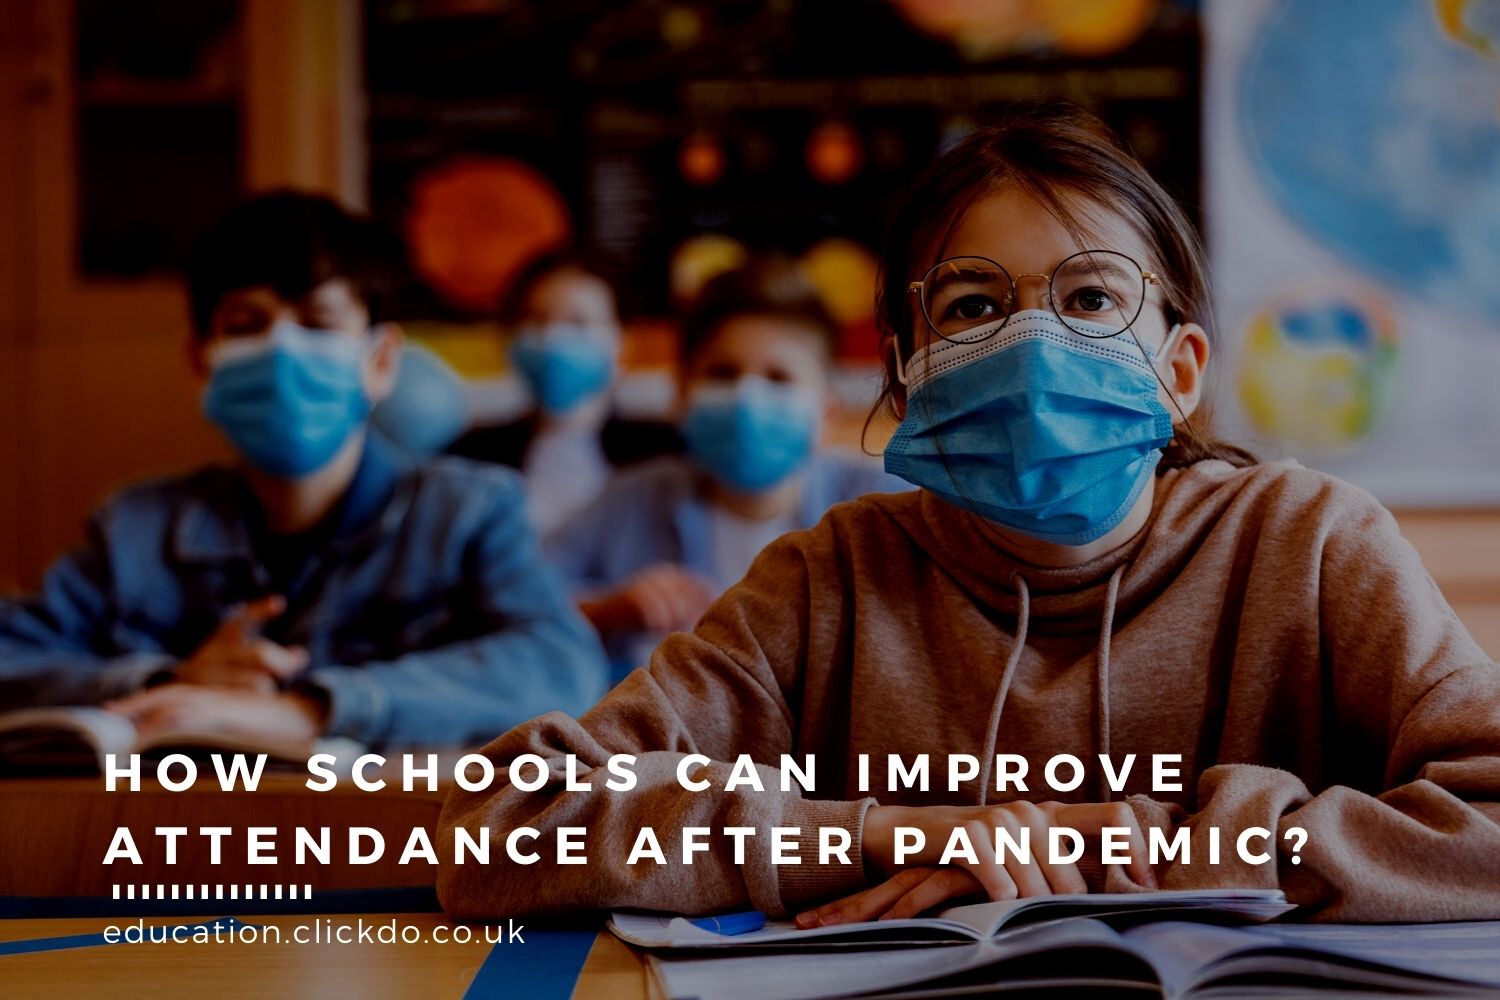 What Private Schools Can Do To Improve Attendance After the Pandemic Over The Coming Years